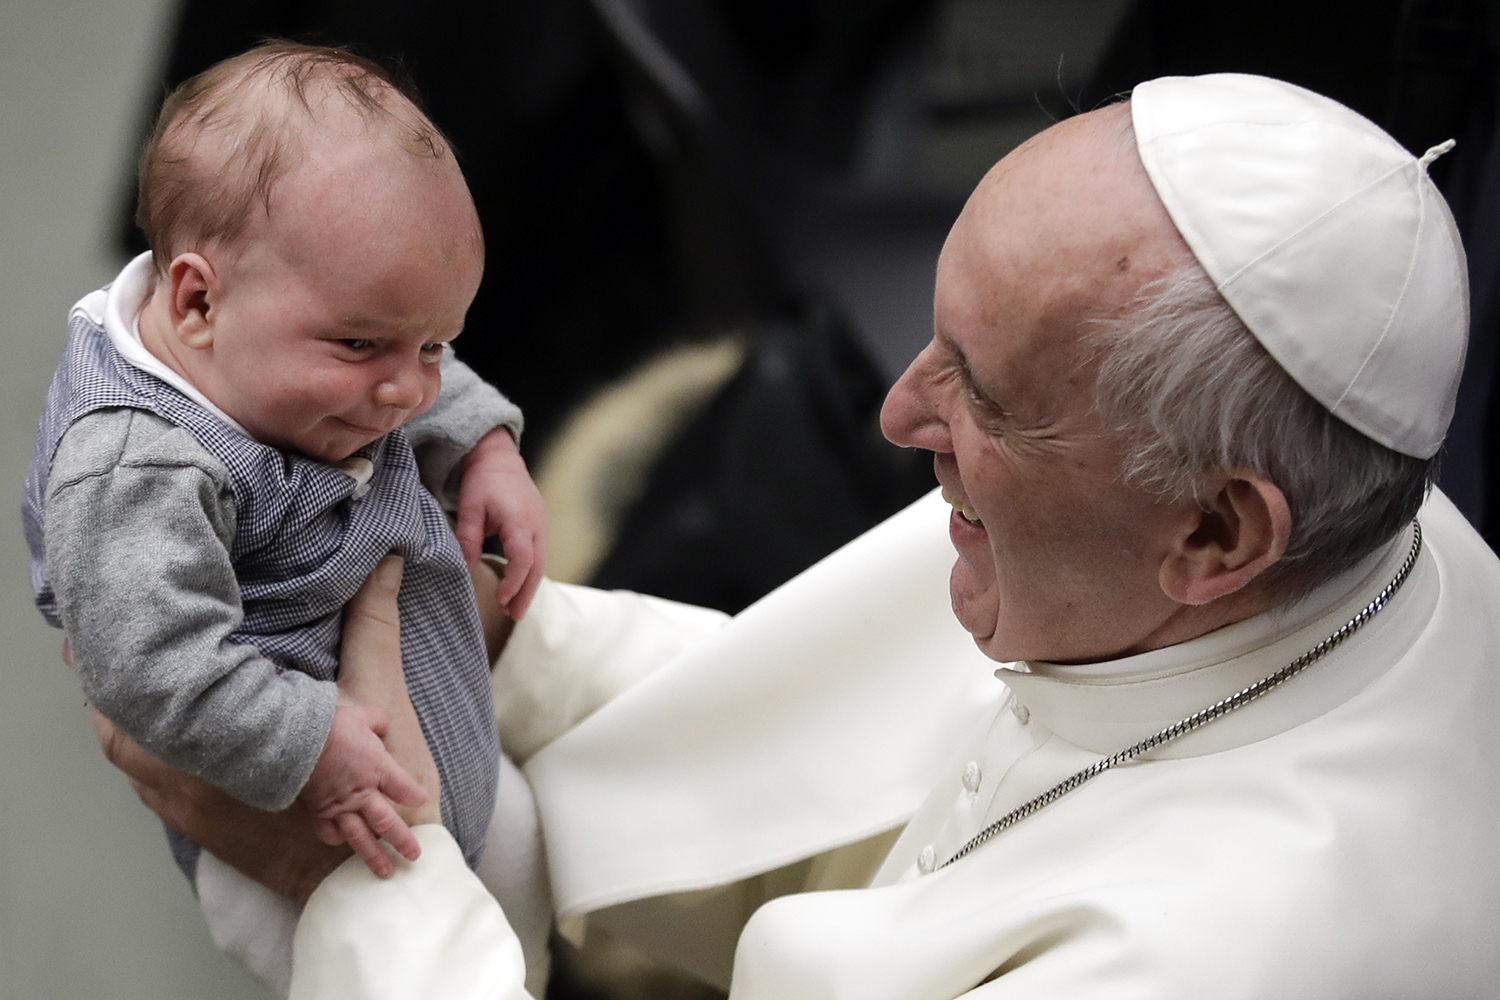 Pope Francis holds a baby during an audience with members of Entrepreneurs for Economy of Communion, at the Paul VI Hall, at the Vatican, Saturday, Feb. 4, 2017. (AP Photo/Andrew Medichini)